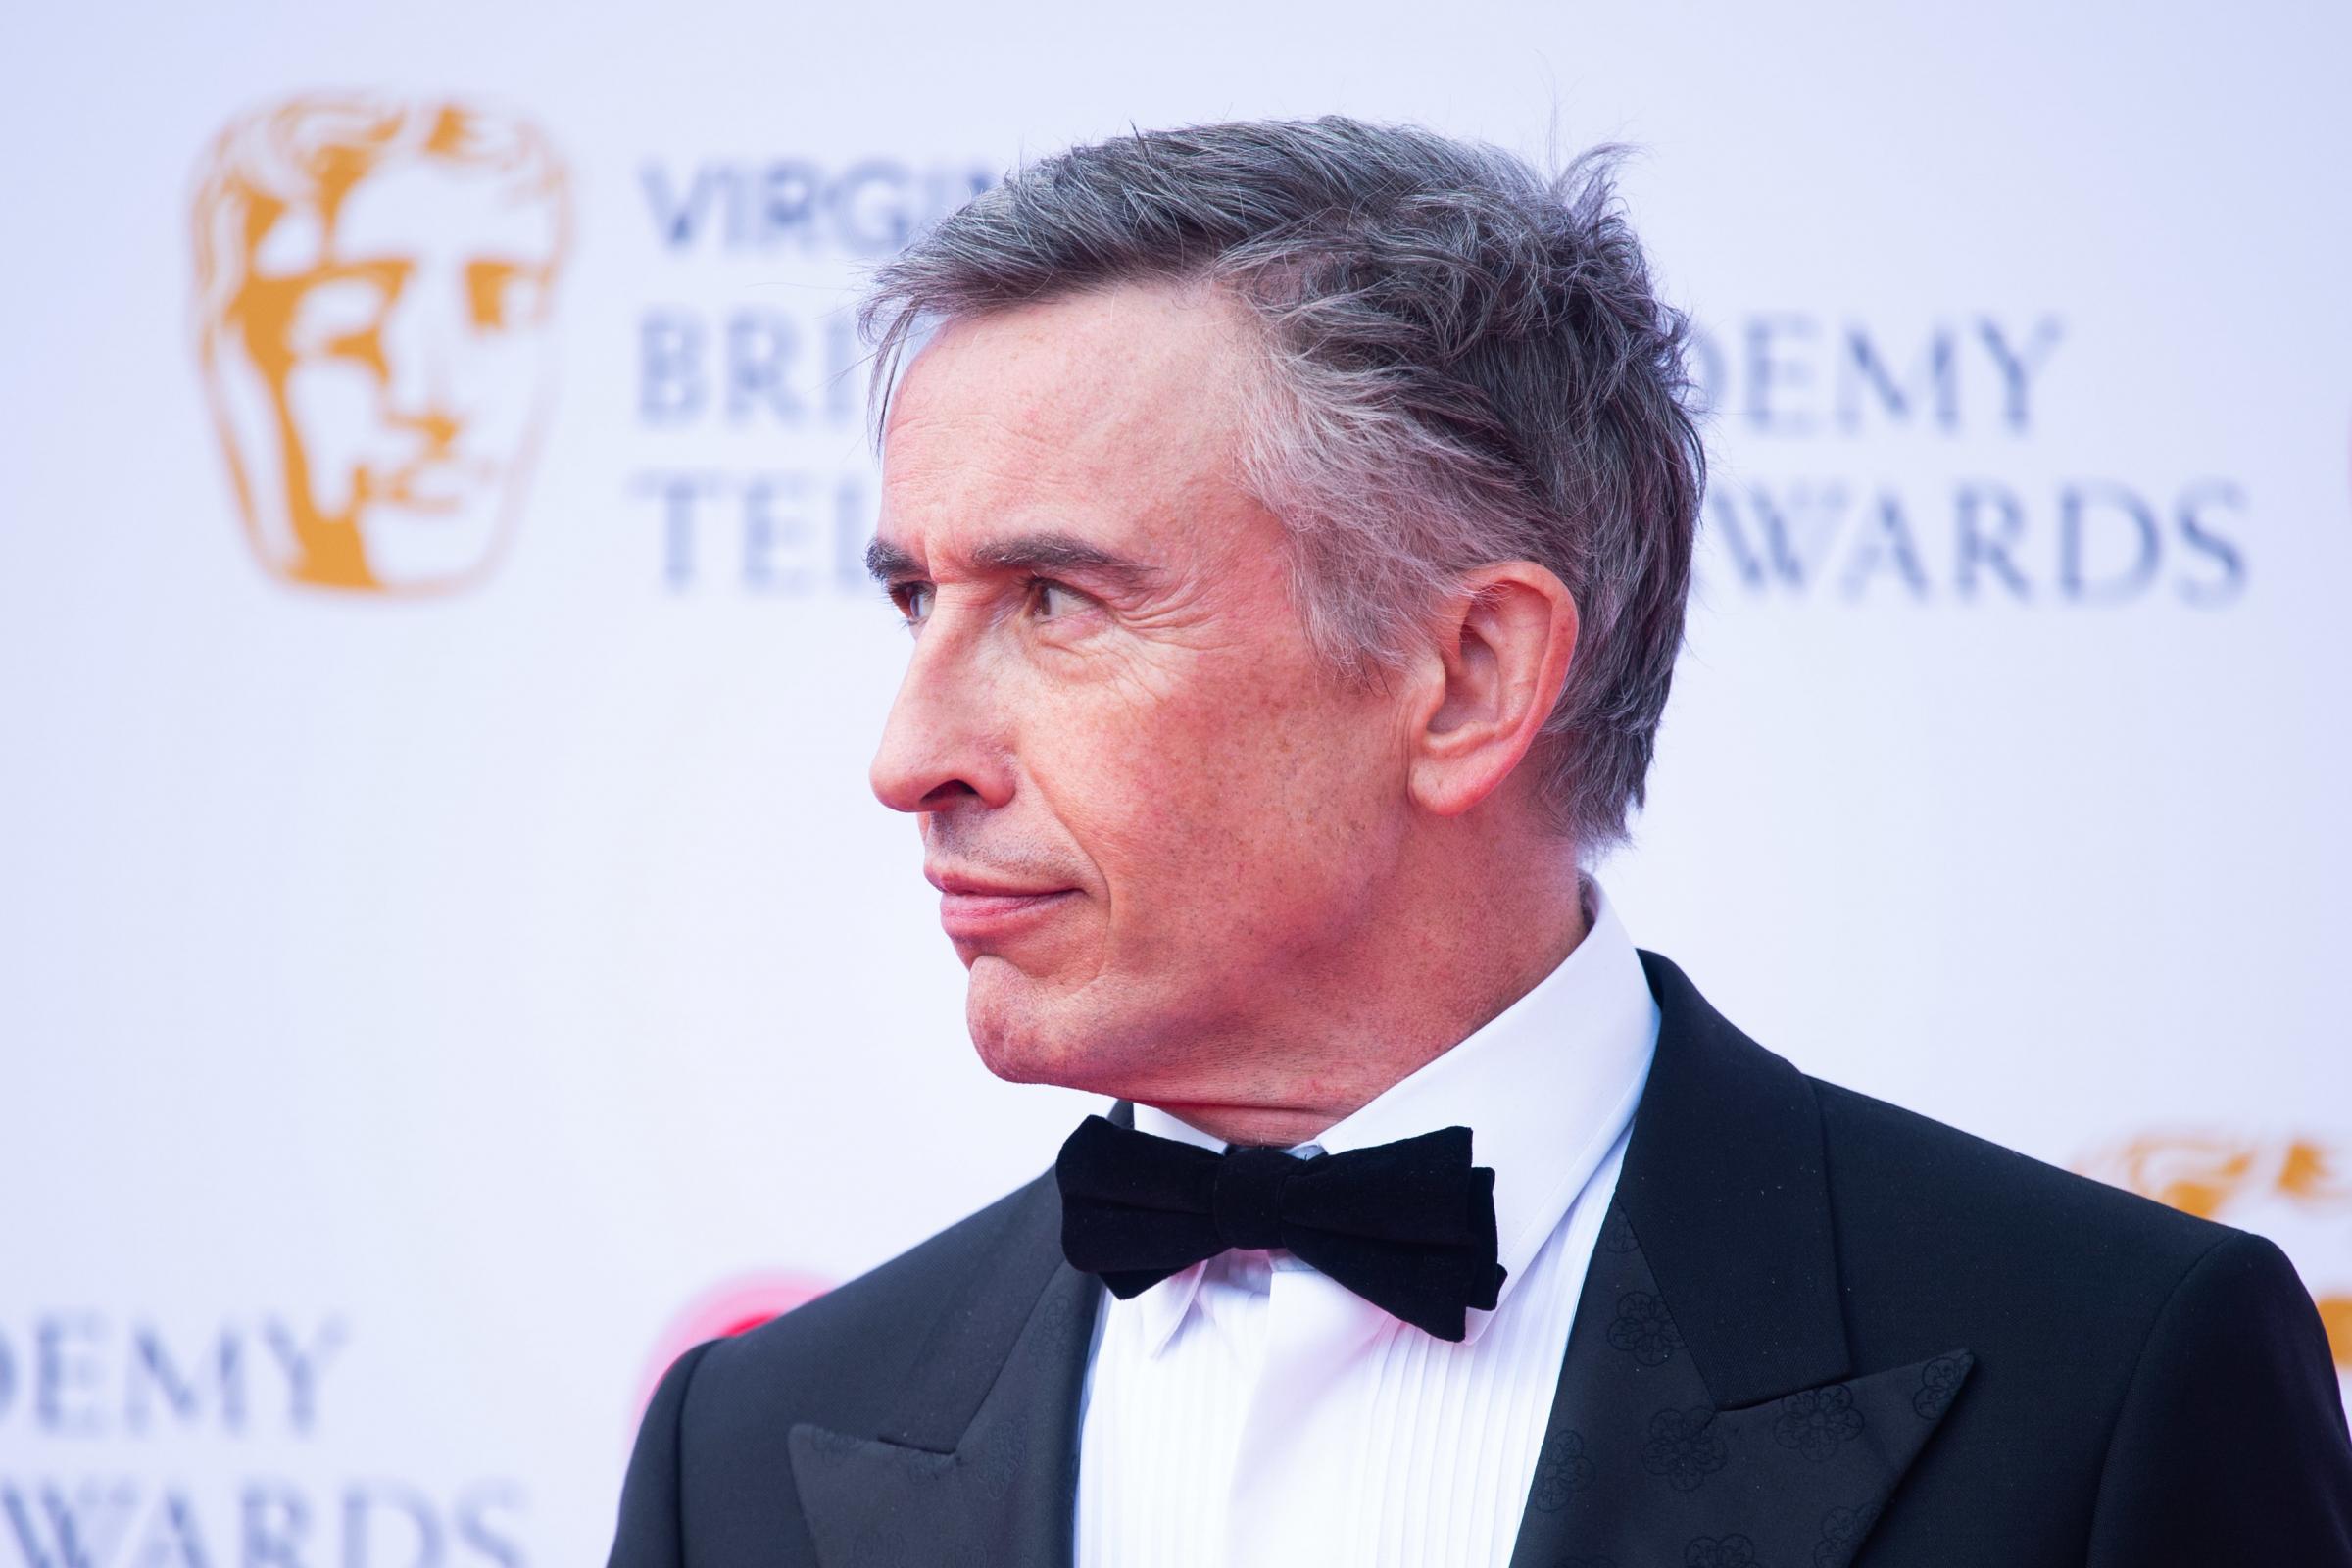 Scotland voting Yes would give London establishment a 'bloody nose', says Steve Coogan